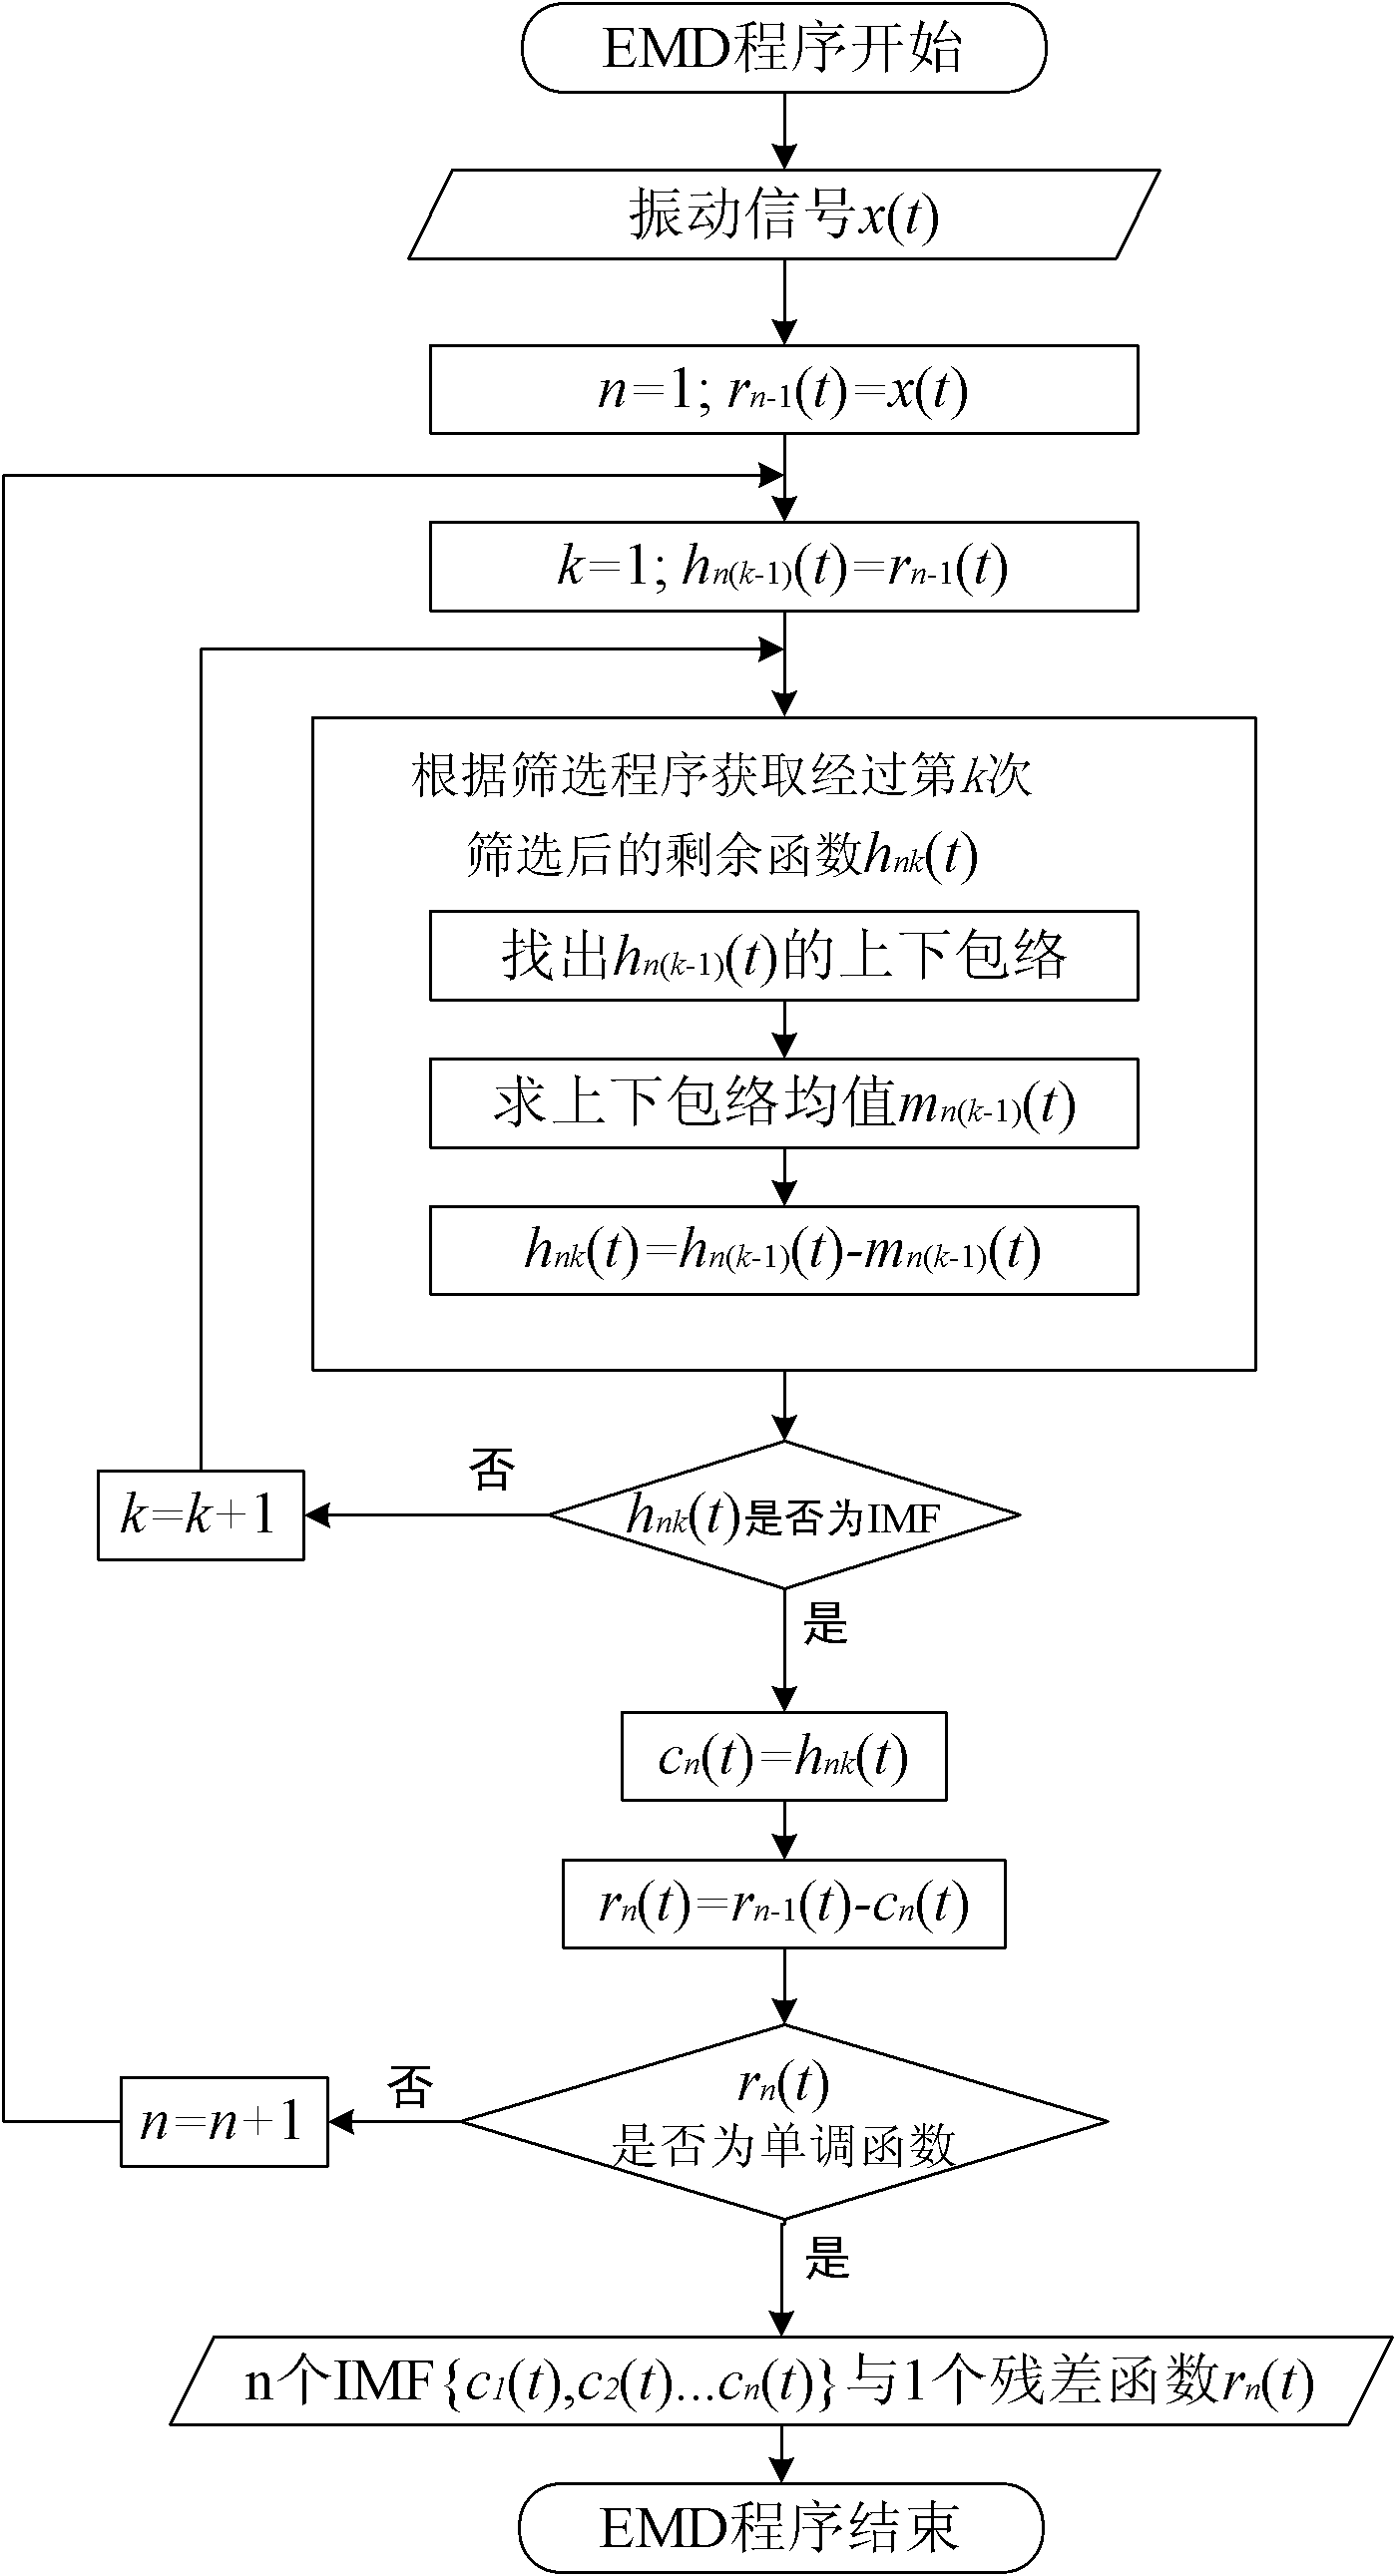 Method and device for detecting defects and failures of high-speed rail based on vibration signals